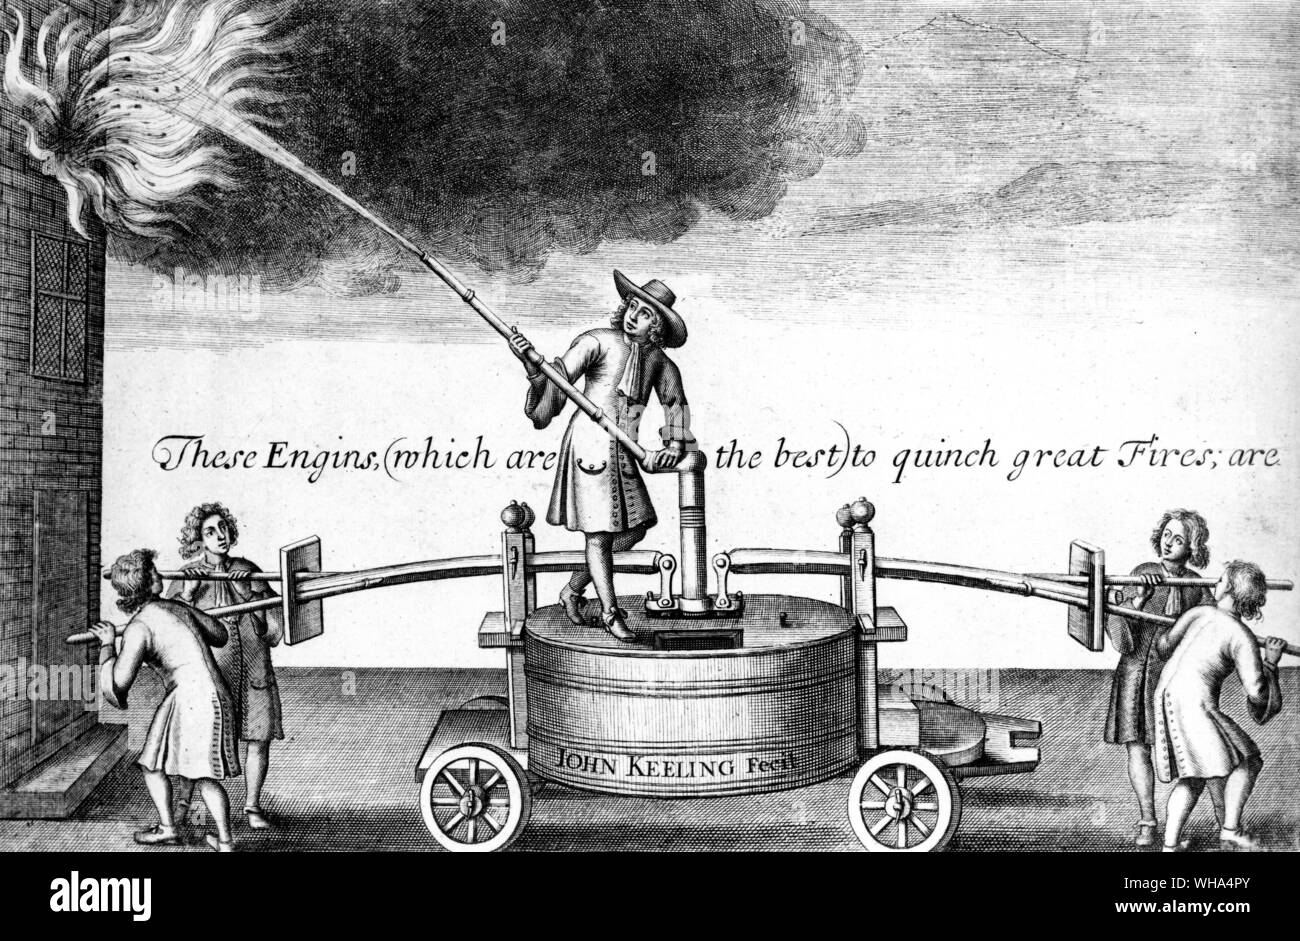 A seventeenth century fire squirt, John Keeling's fire engine. In the absene of efficient pumps and flexible hose, fire-fighting equipment was hopelessly inadequate to cope with any large-scale outbreak. Taken from Pepys, Samuel English diarist and naval administrator; kept diary 1660-1669 (published 1893-1899); president of Royal Society 1684-1686  1633-1703 Stock Photo